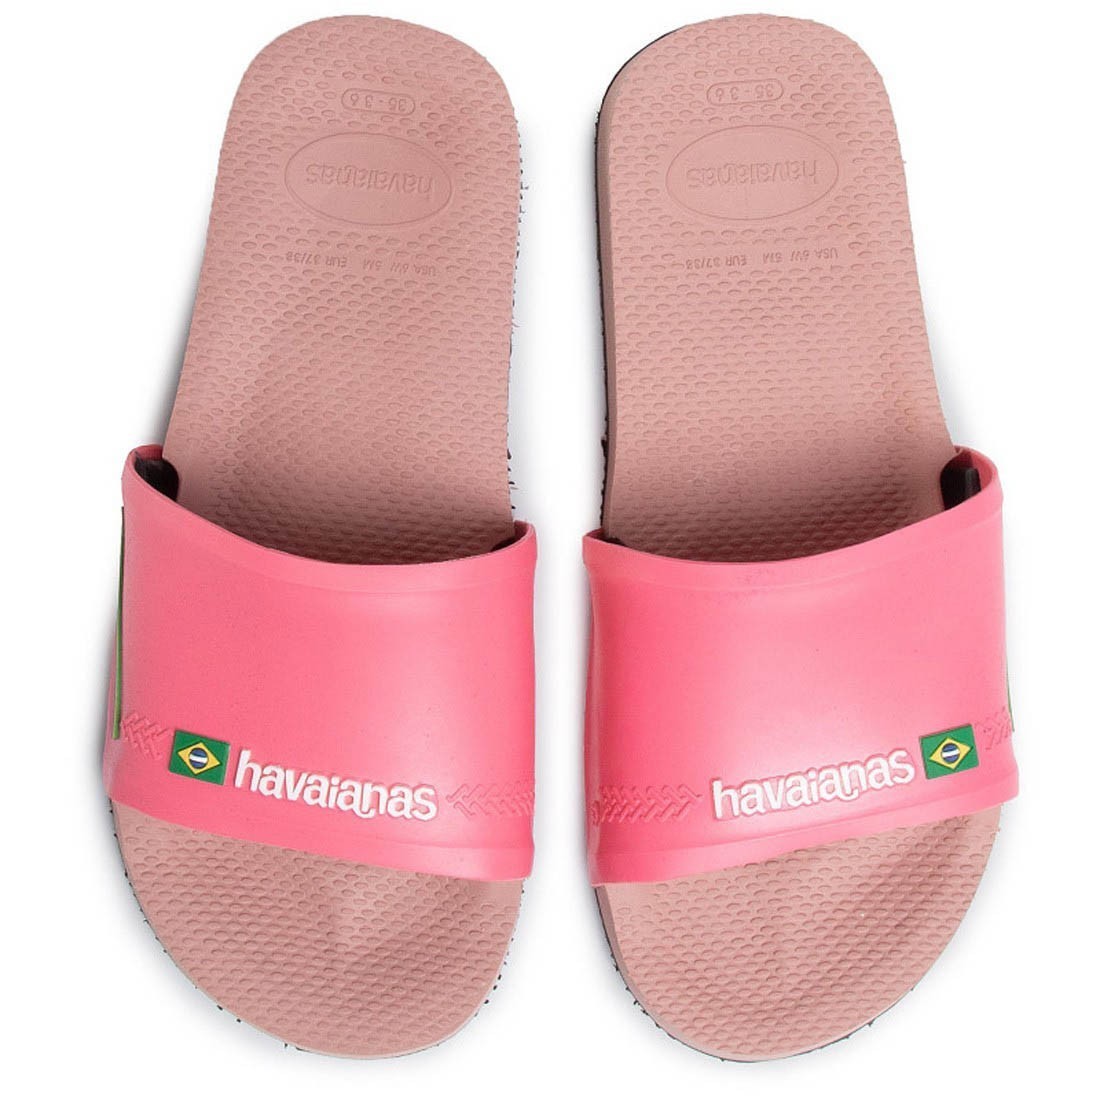 Order Havaianas Slide Crocus Rose - Havaianas, delivered to your home ...